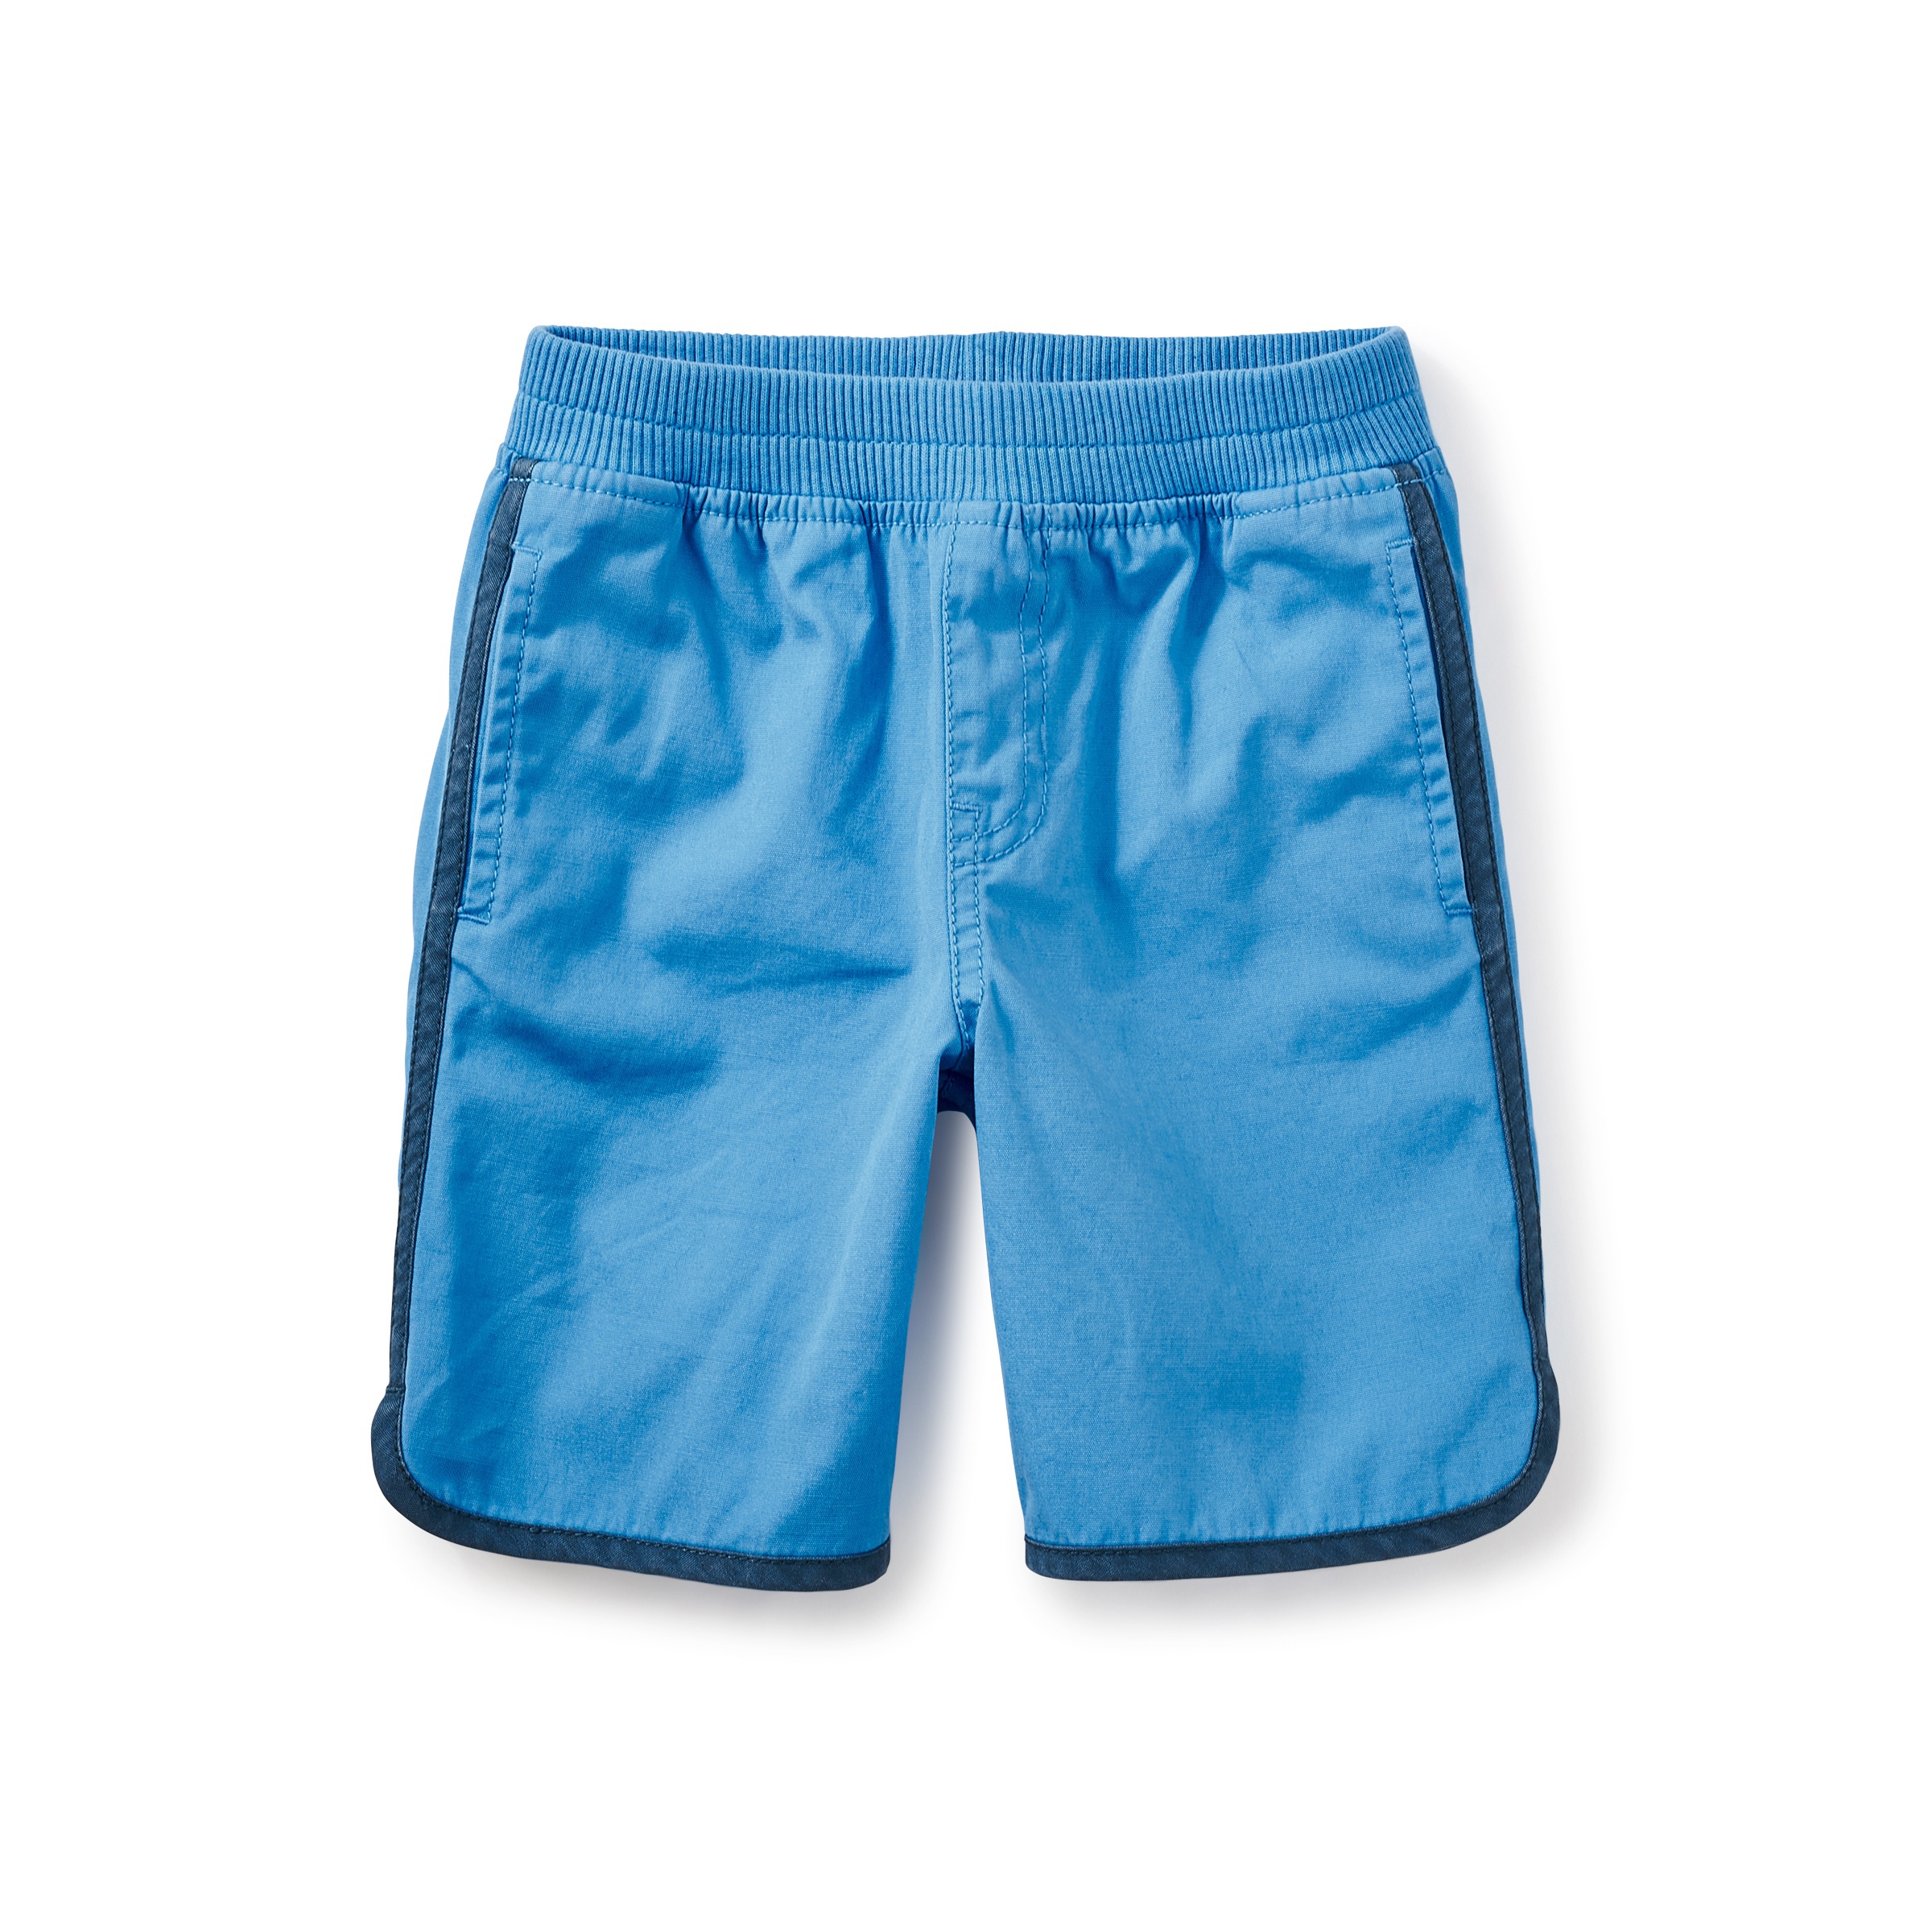 Melbourne Piped Shorts | Tea Collection